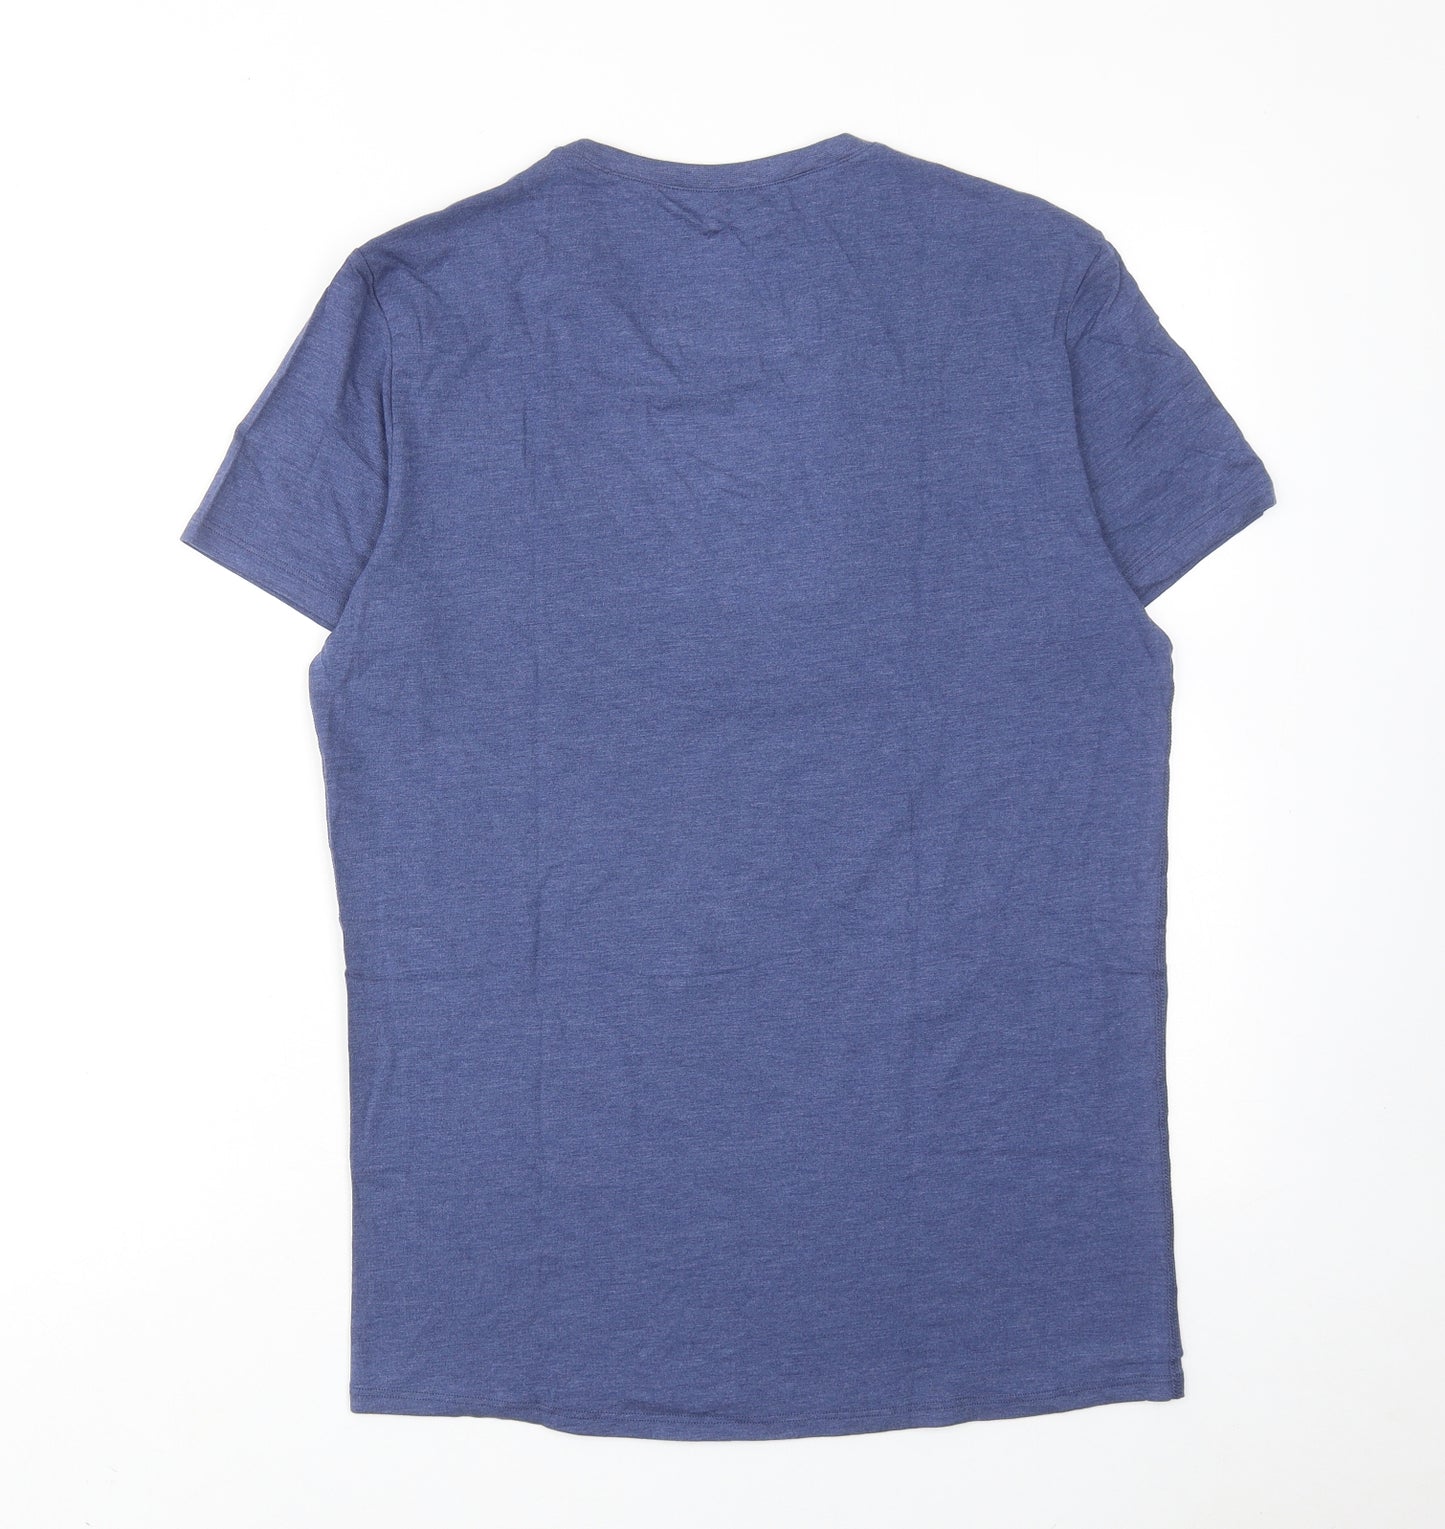 Marks and Spencer Mens Blue Viscose T-Shirt Size M Round Neck